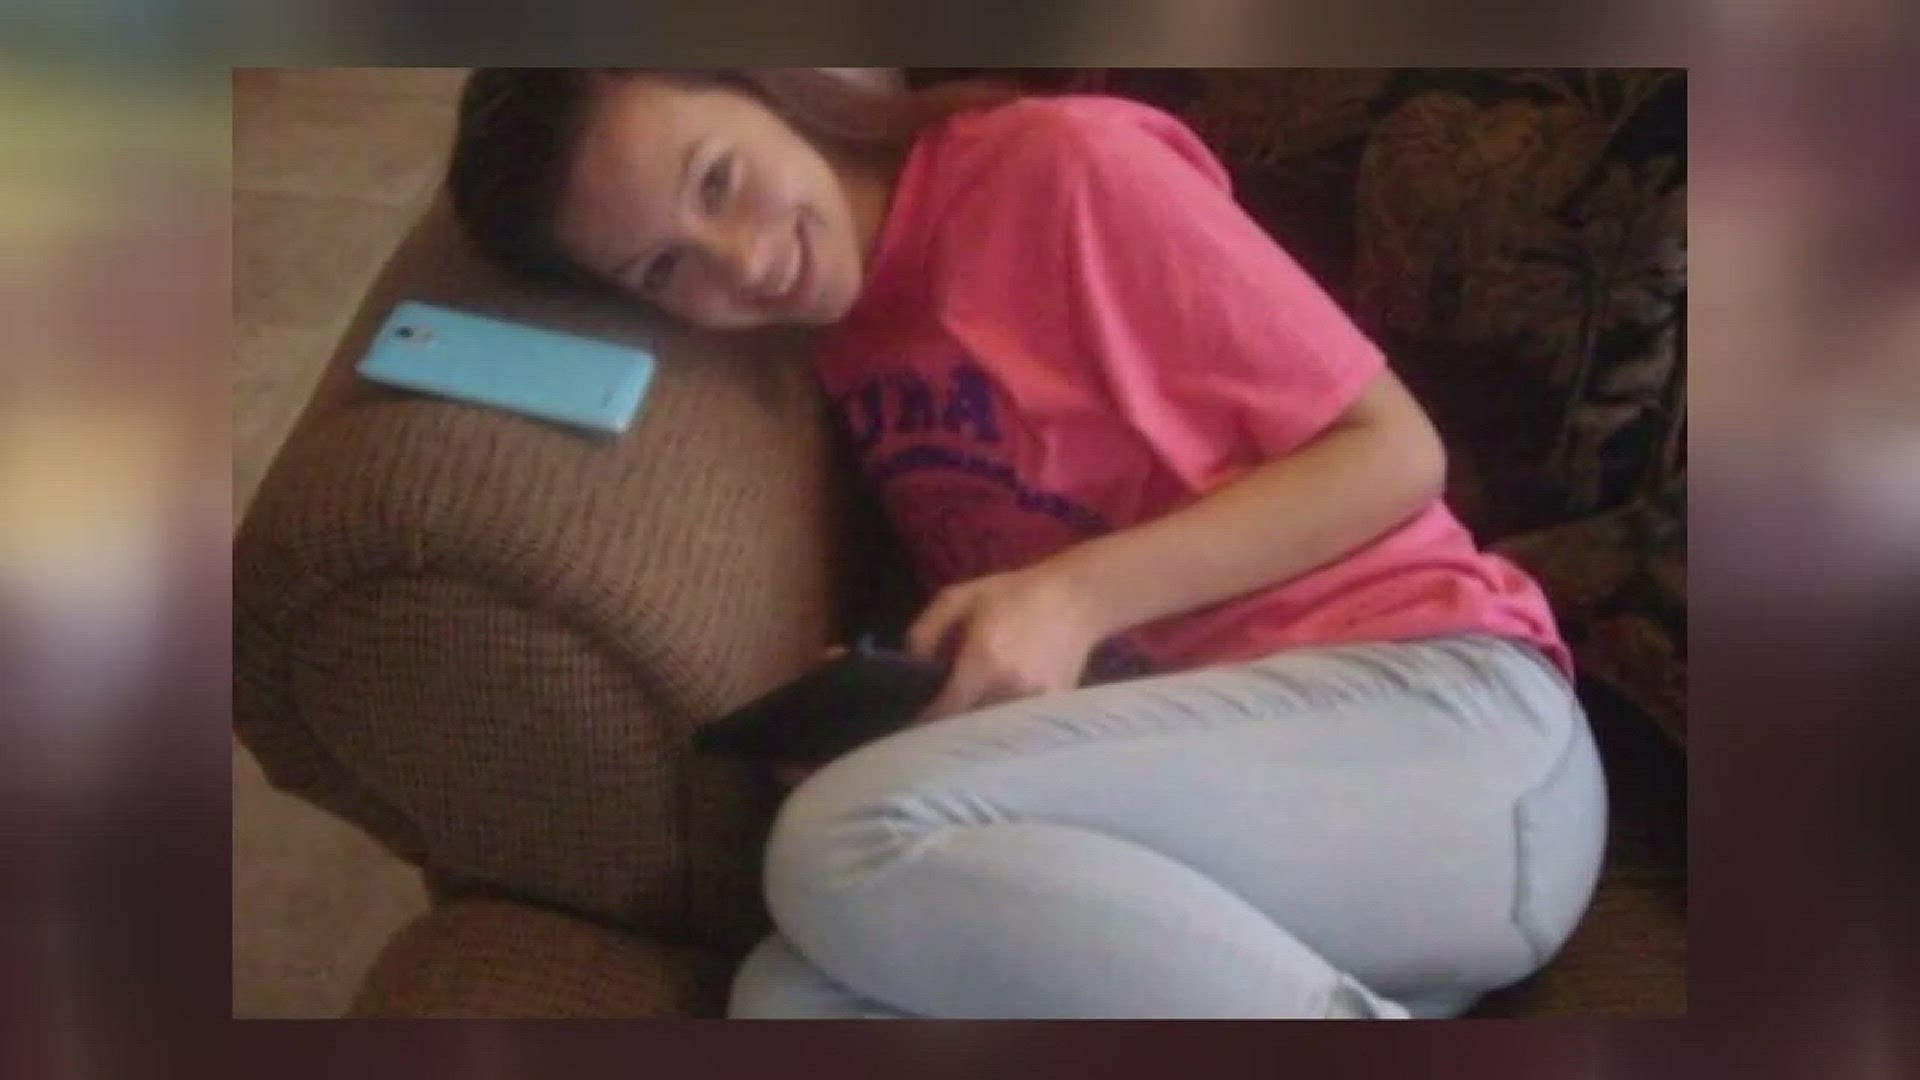 The family of a Silsbee teen thought she was still asleep when they first checked on her but later made a horrible discovery when she was found fatally shot in bed Sunday evening.